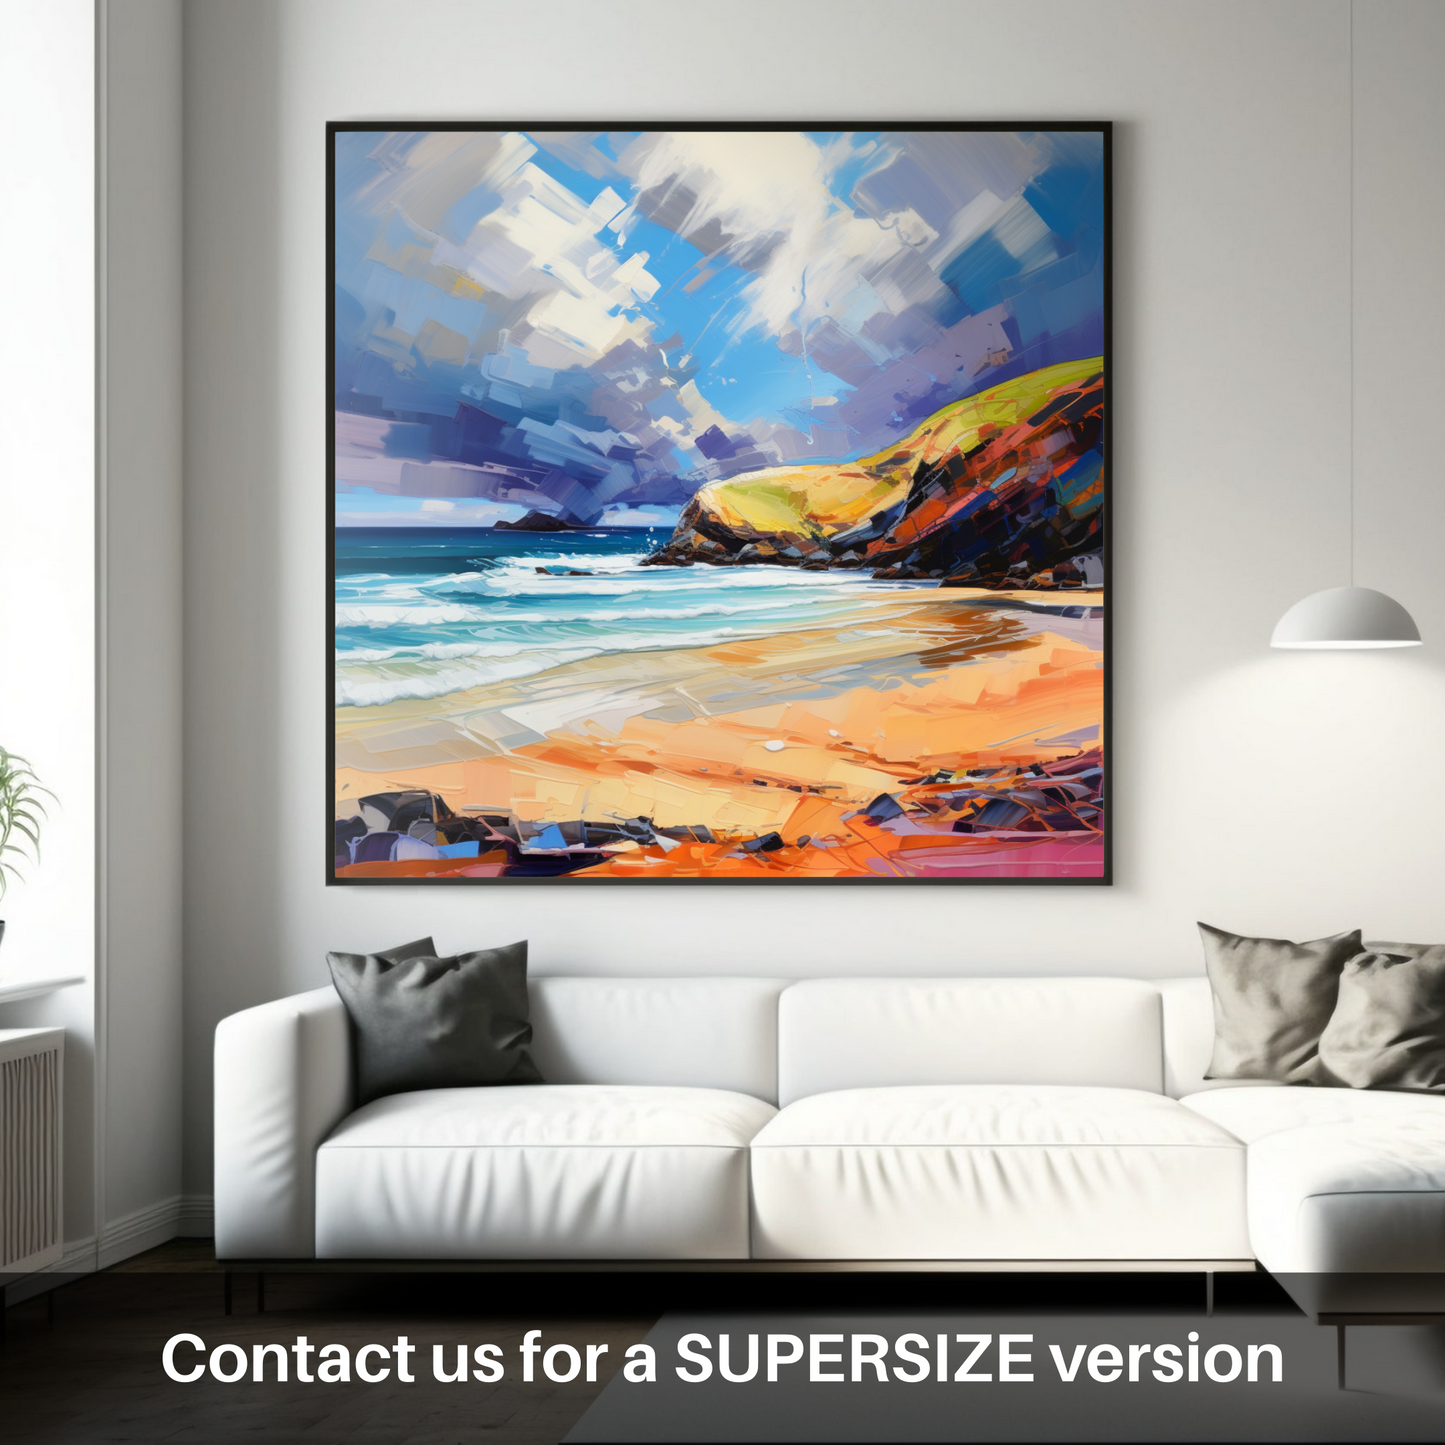 Huge supersize print of Sandwood Bay with a stormy sky